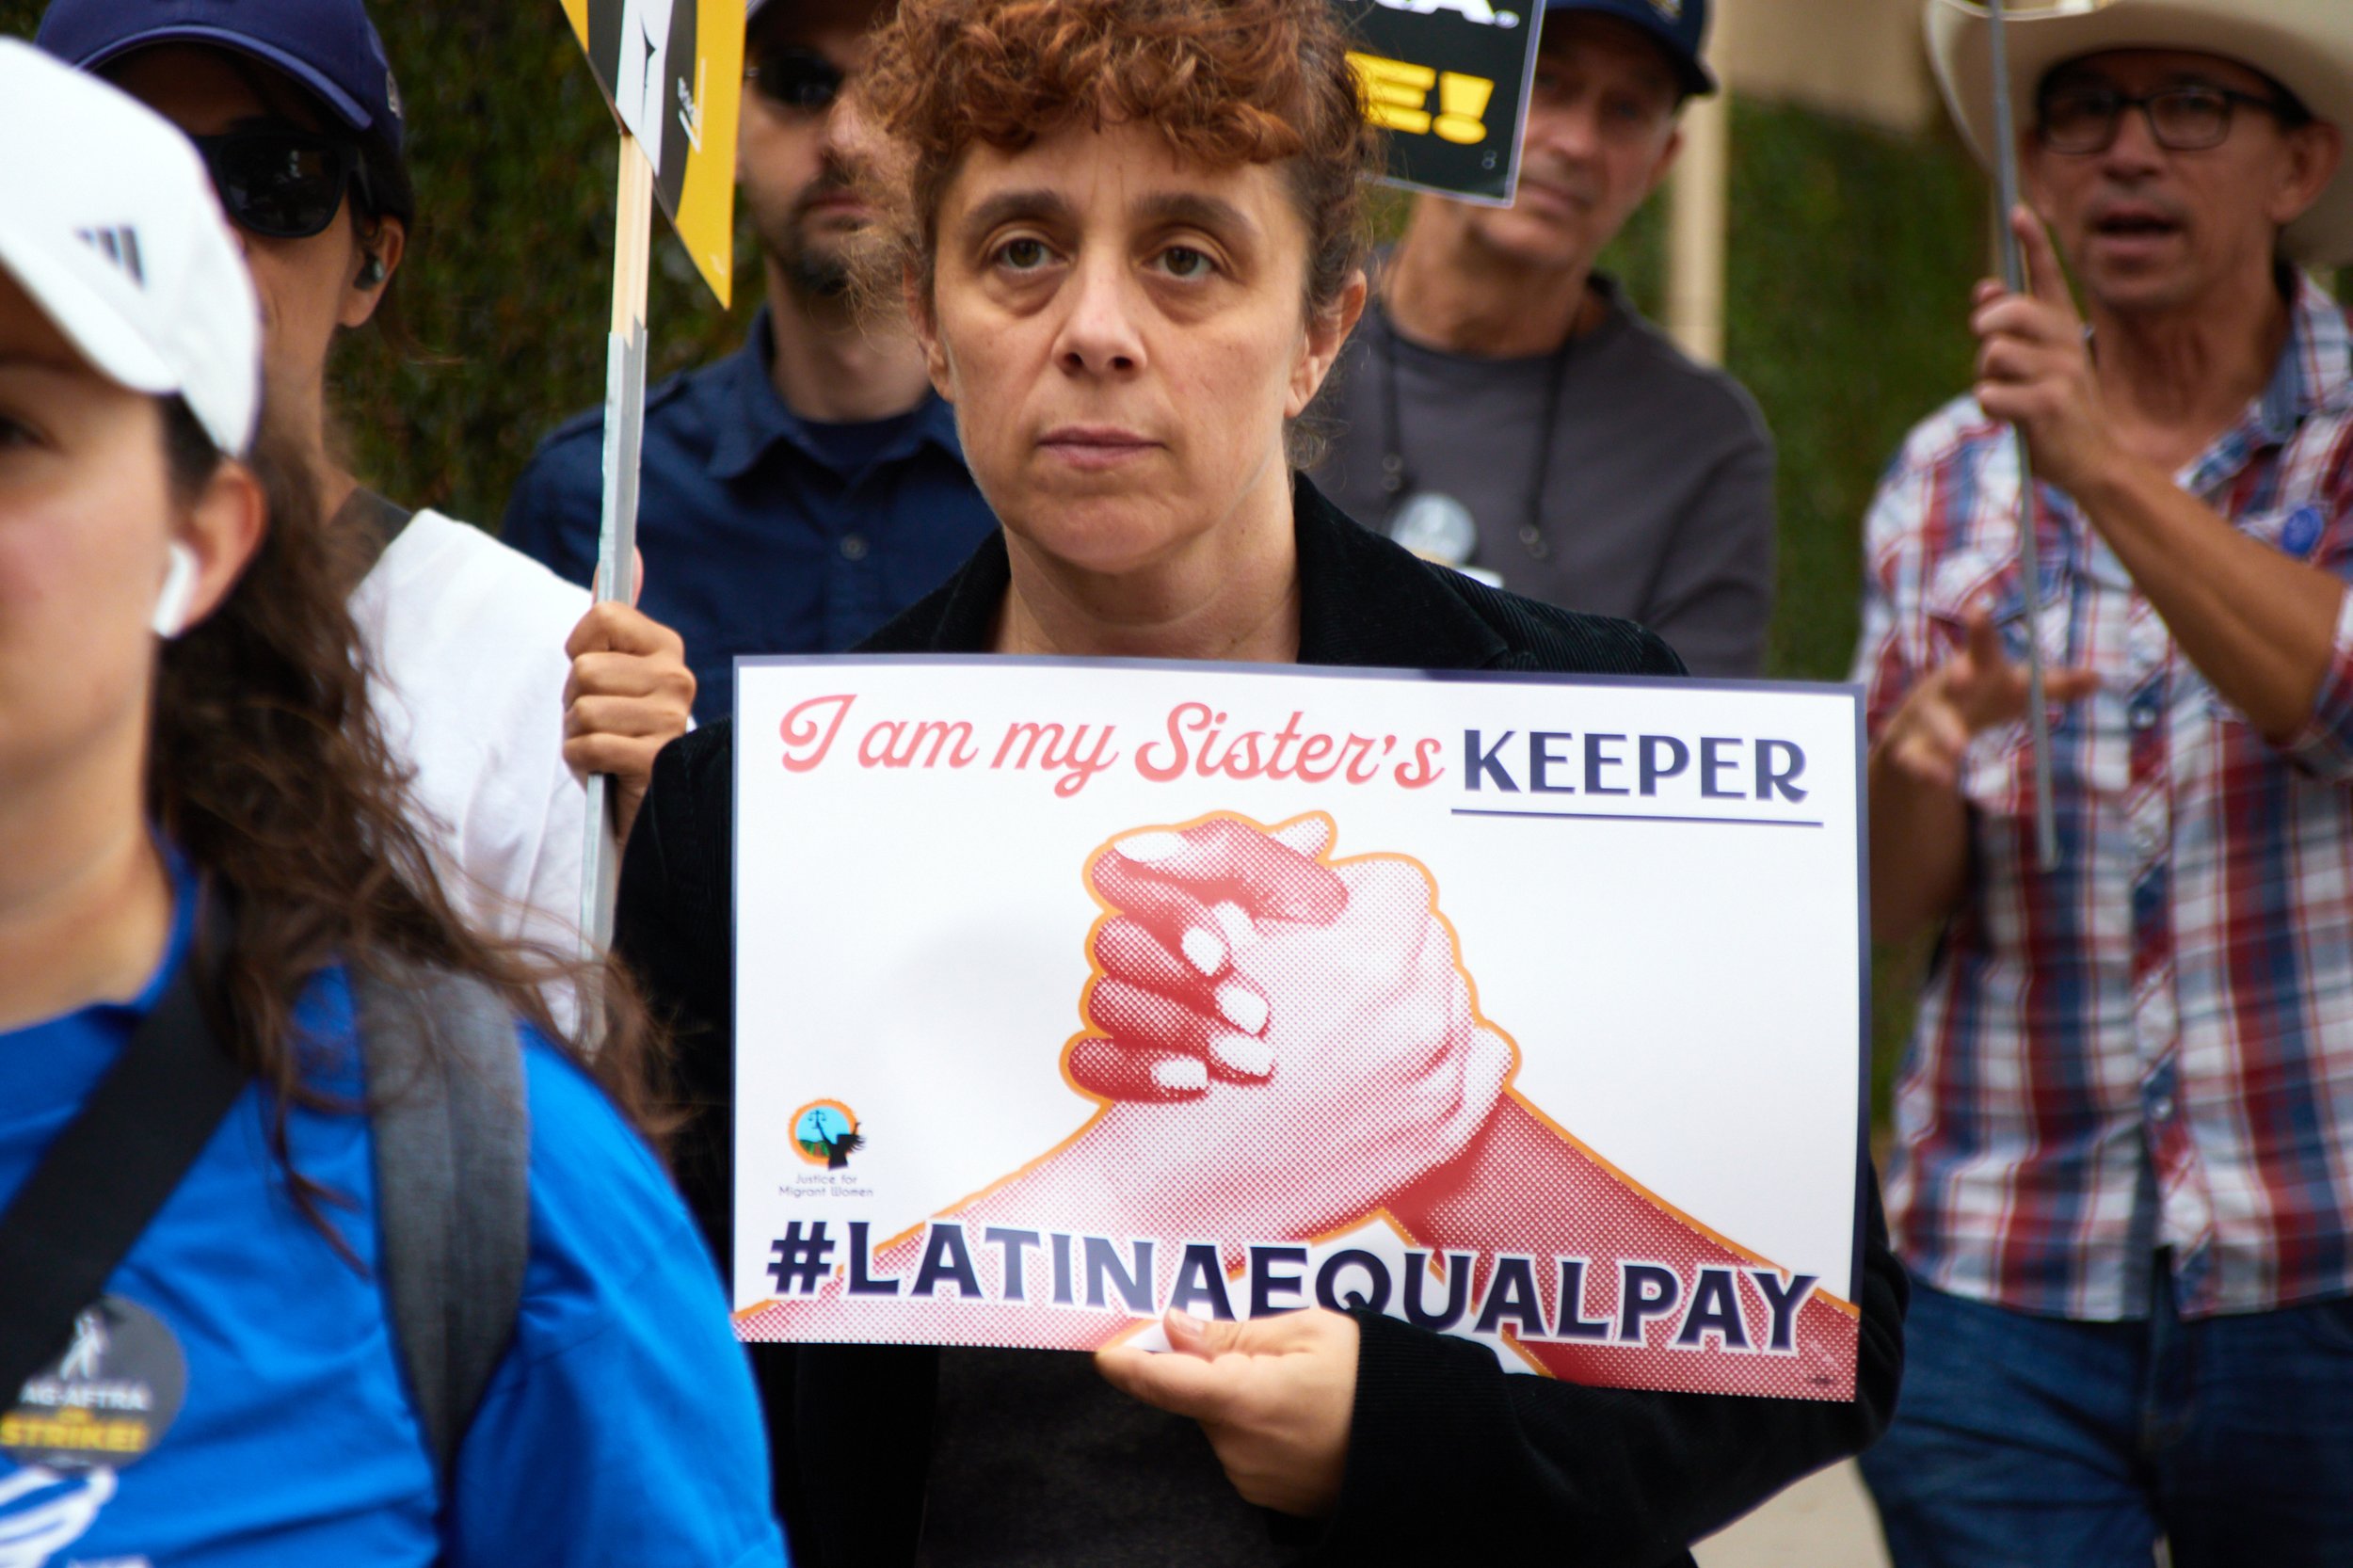  A woman holding a sign with "I am my Sister's KEEPER", "#LATINAEQUALPAY" written on alongside the "Justice for Migrant Women" logo marches alongside picketers during the SAG-AFTRA strike in front of Warner Bros. Studio, Burbank, Calif., Sept 29, 202